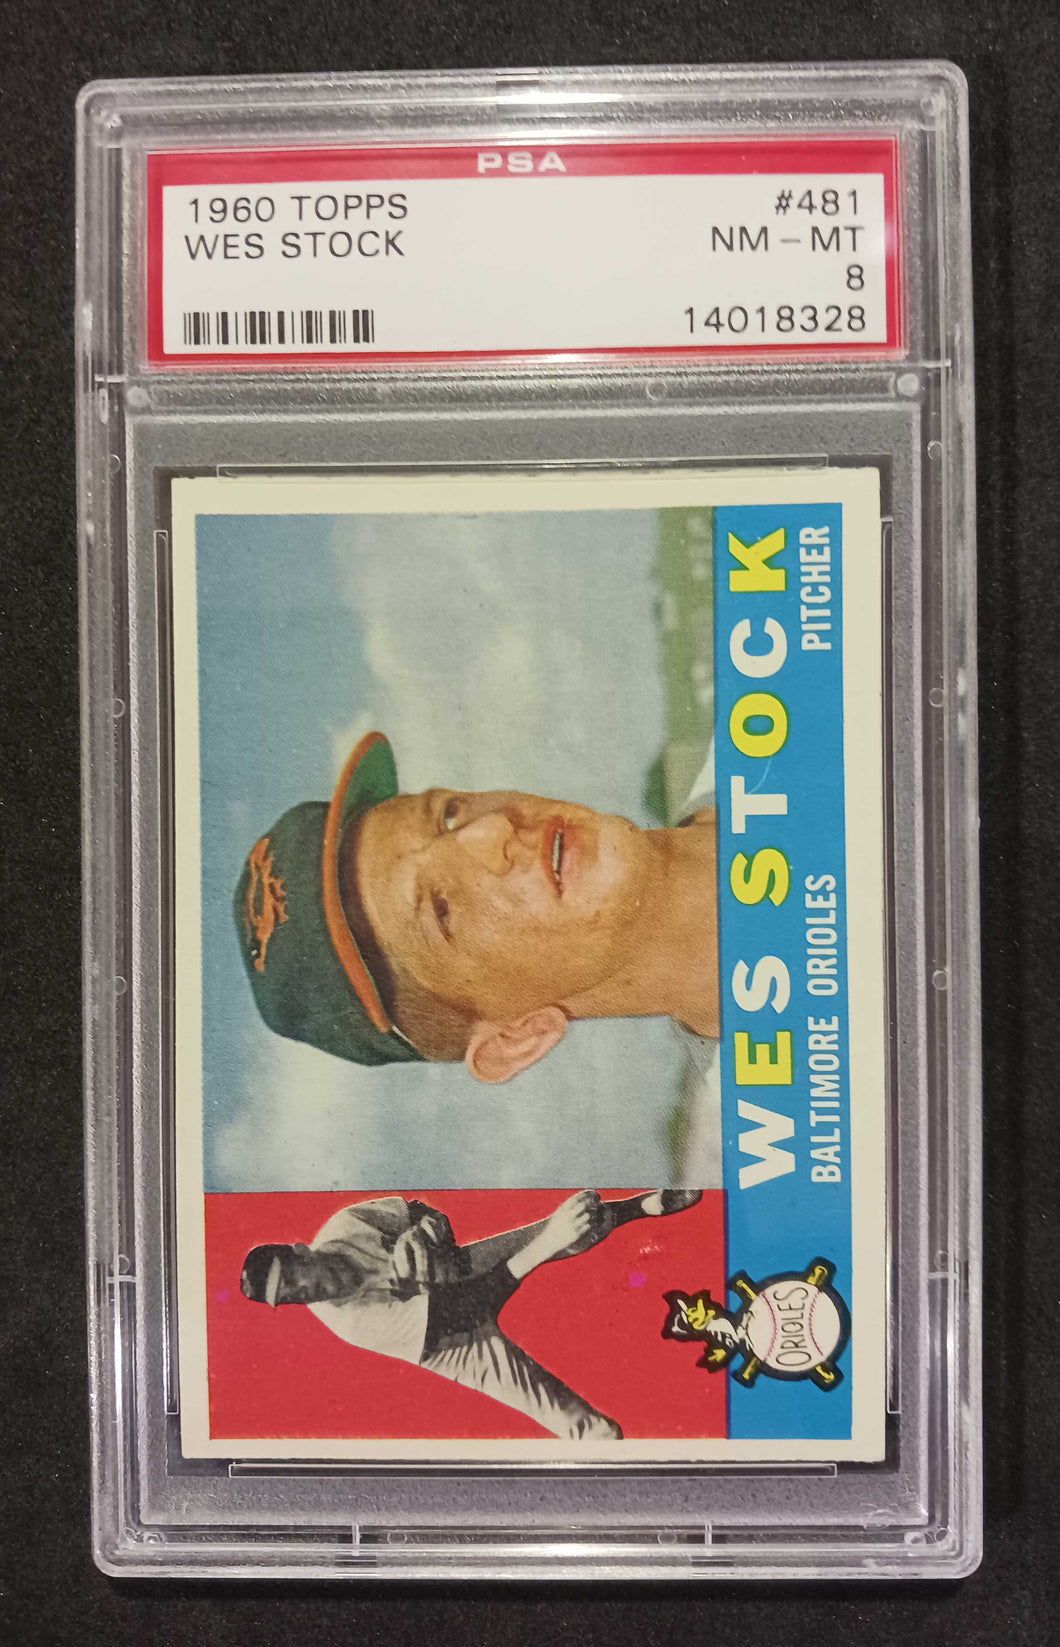 1960 Topps Wes Stock #481 PSA NM-MT 8